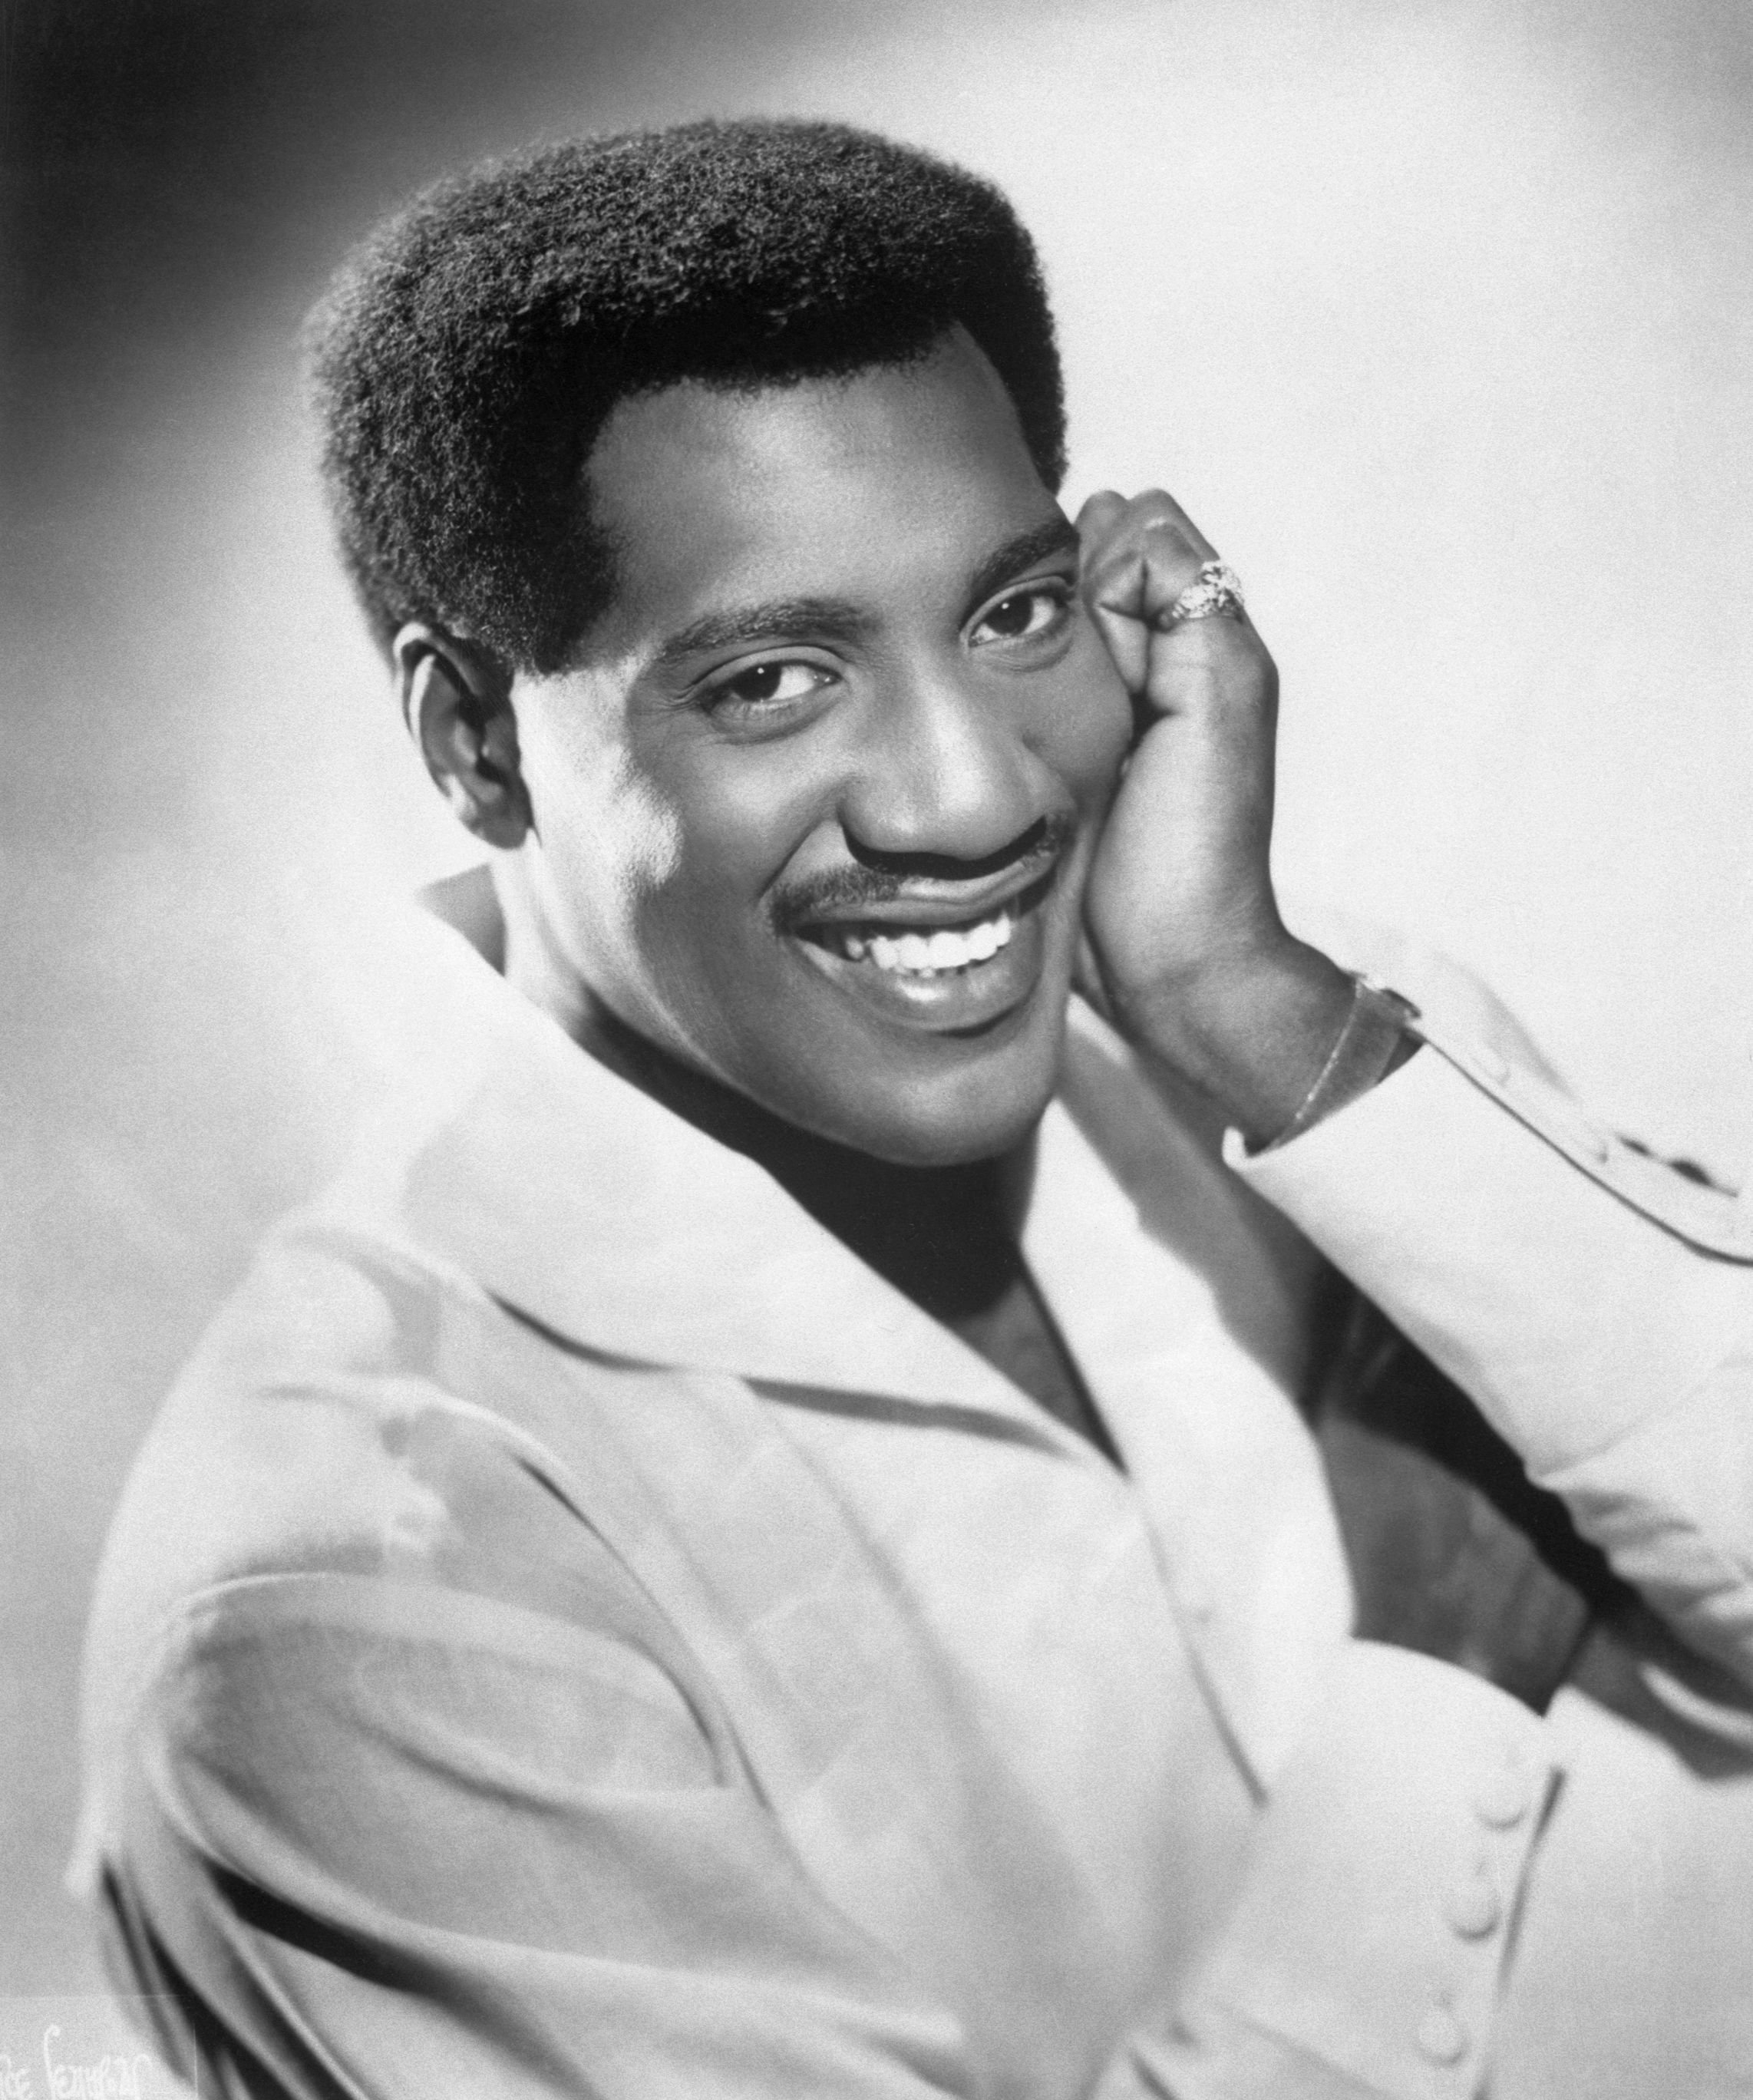 Otis Redding in a publicity handout in the 1960s. | Photo: Getty Images